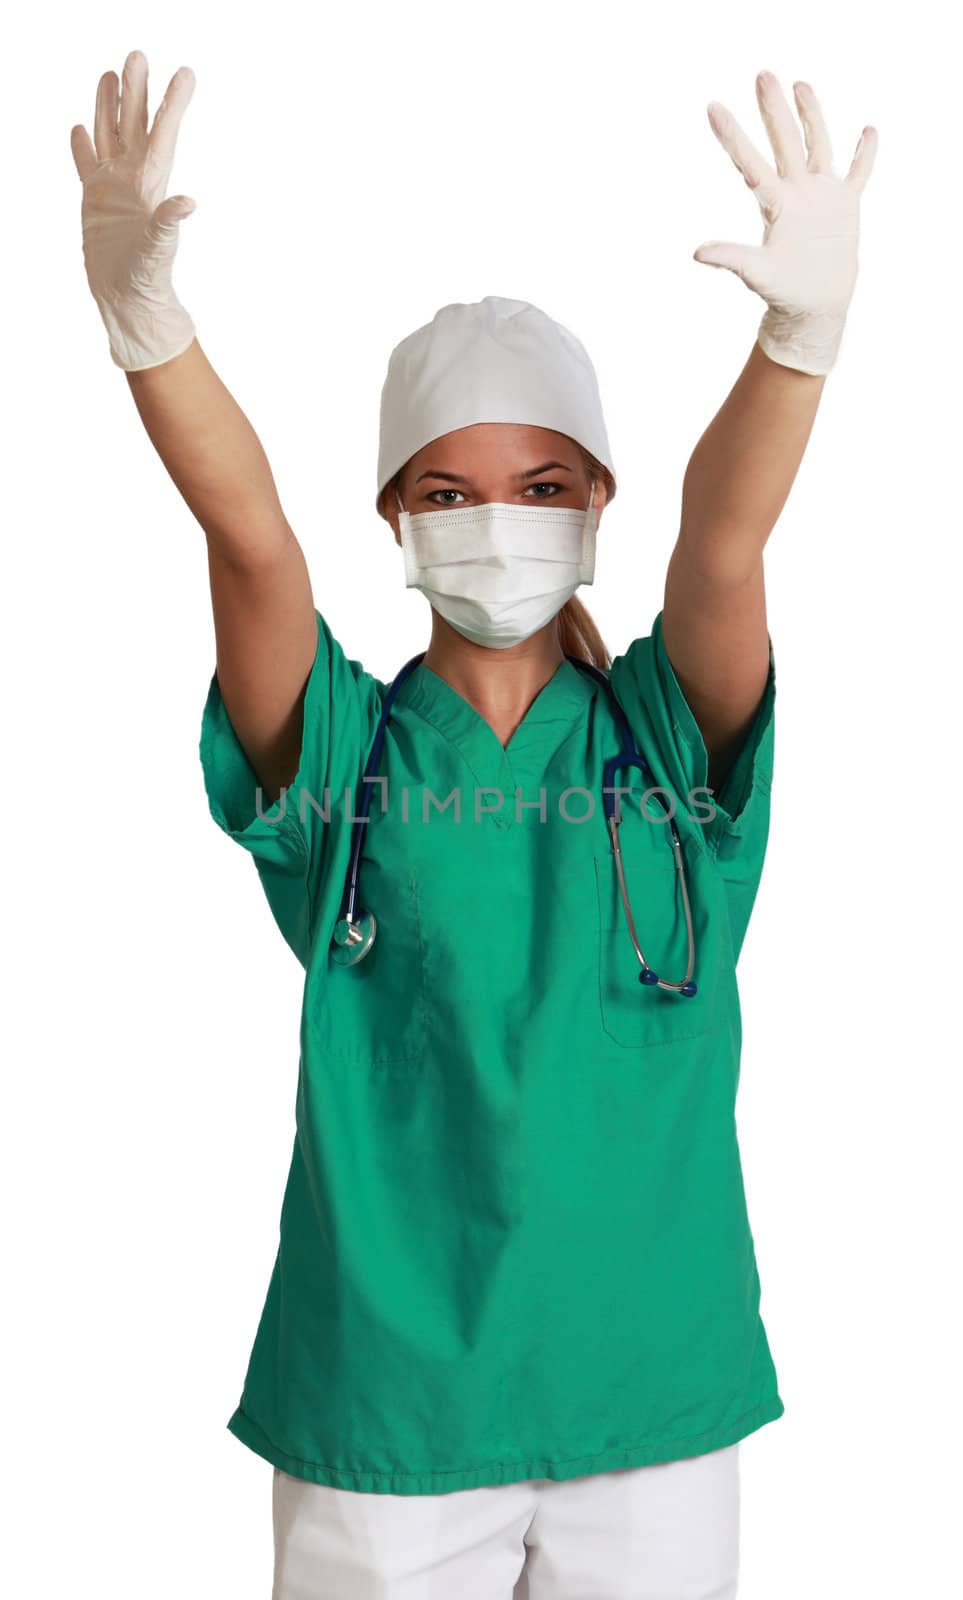 Young female doctor with her hands up isolated against a white background.